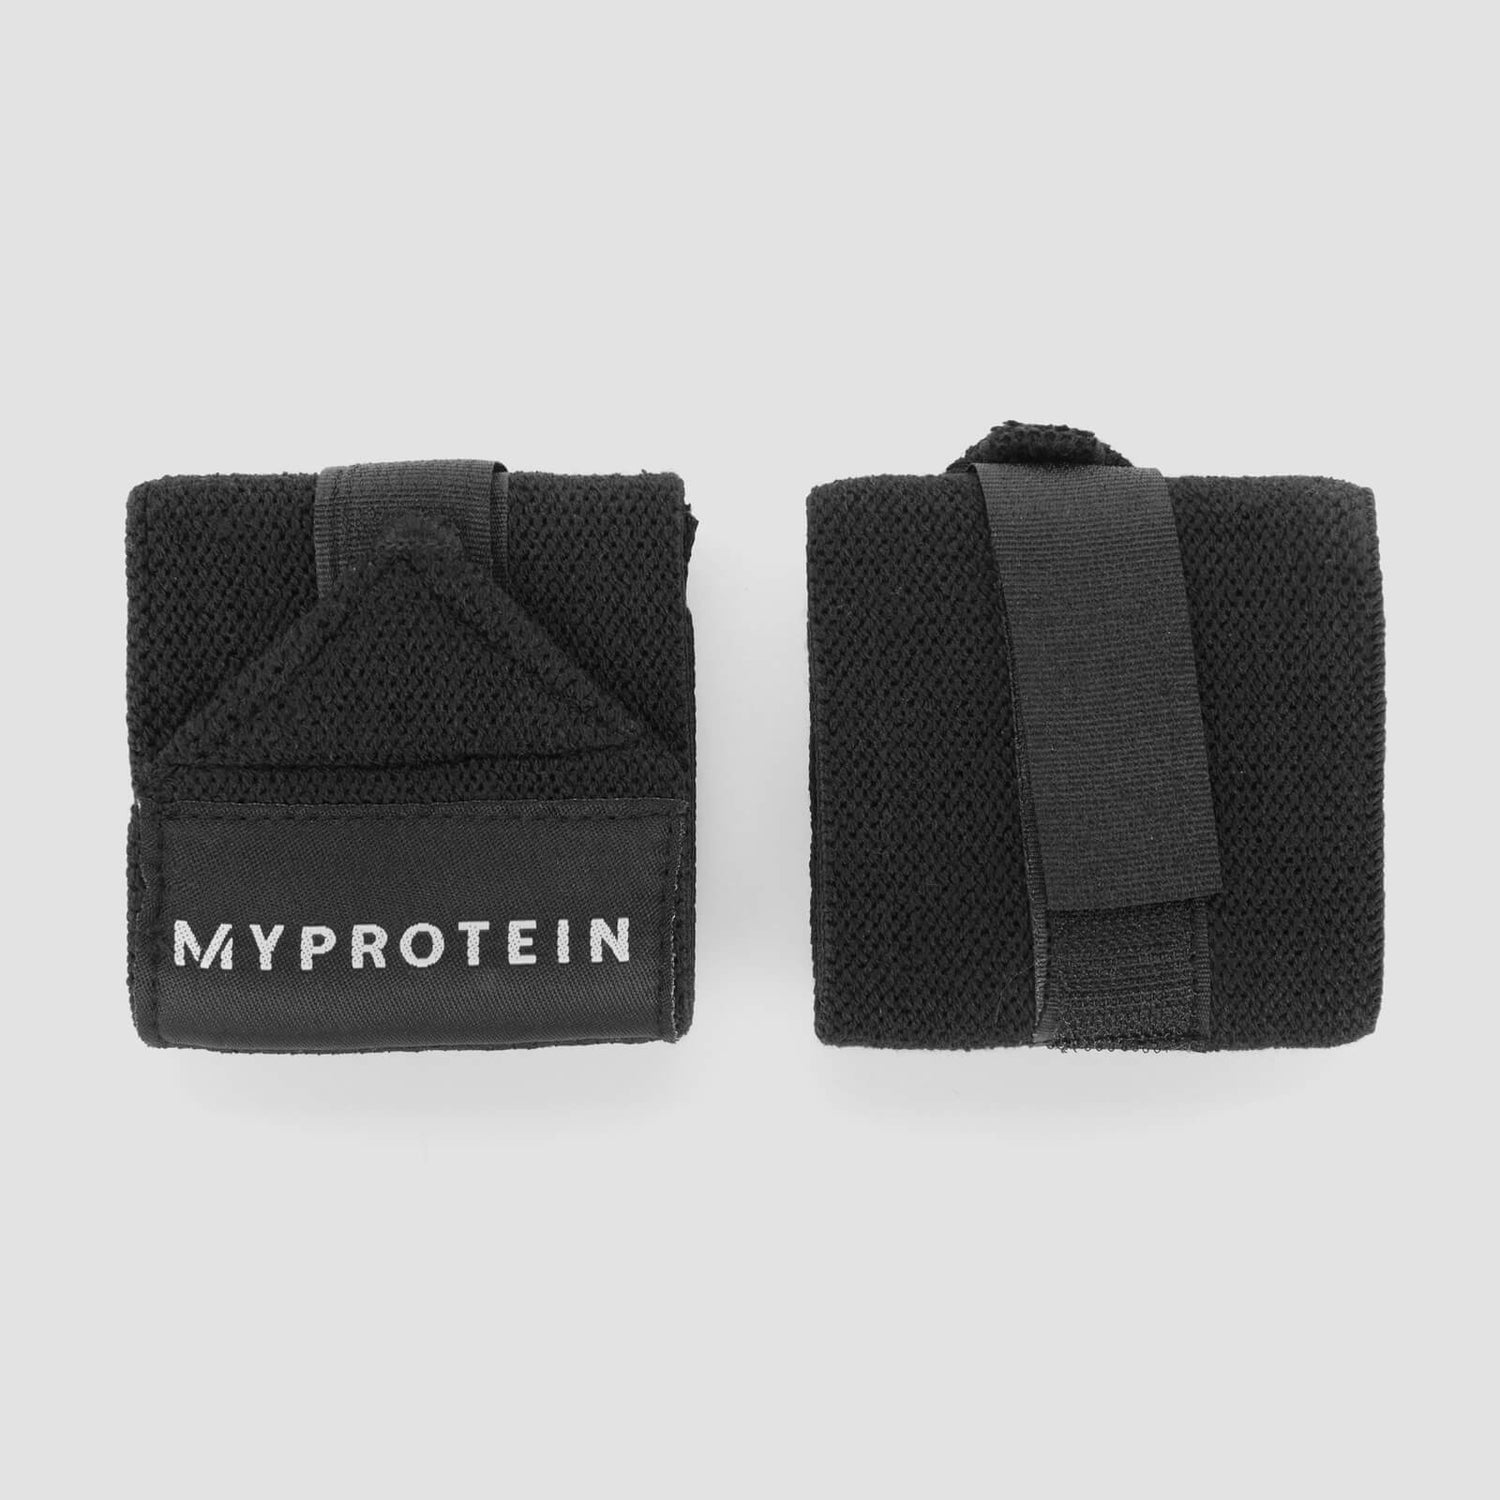 ONE Pair Myprotein Figure of 8 Lifting Straps Brand new in packaging 